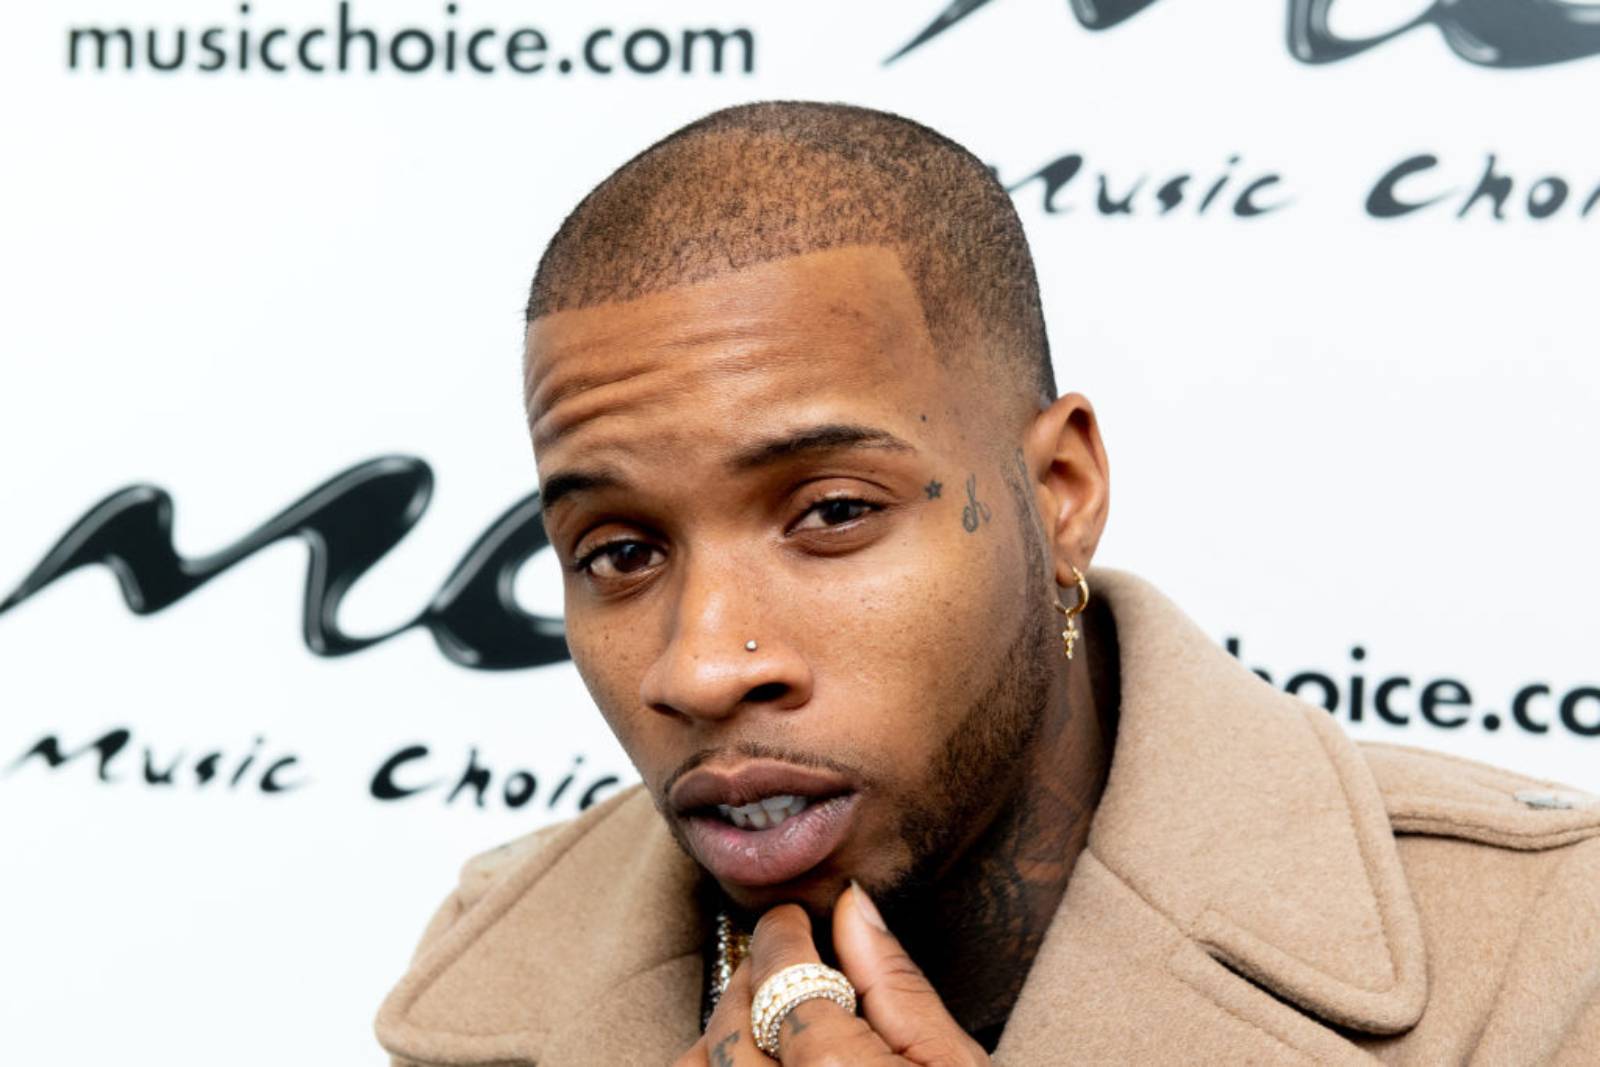 Tory Lanez visits Music Choice on December 13, 2018 in New York City. (Photo by Roy Rochlin/Getty Images)